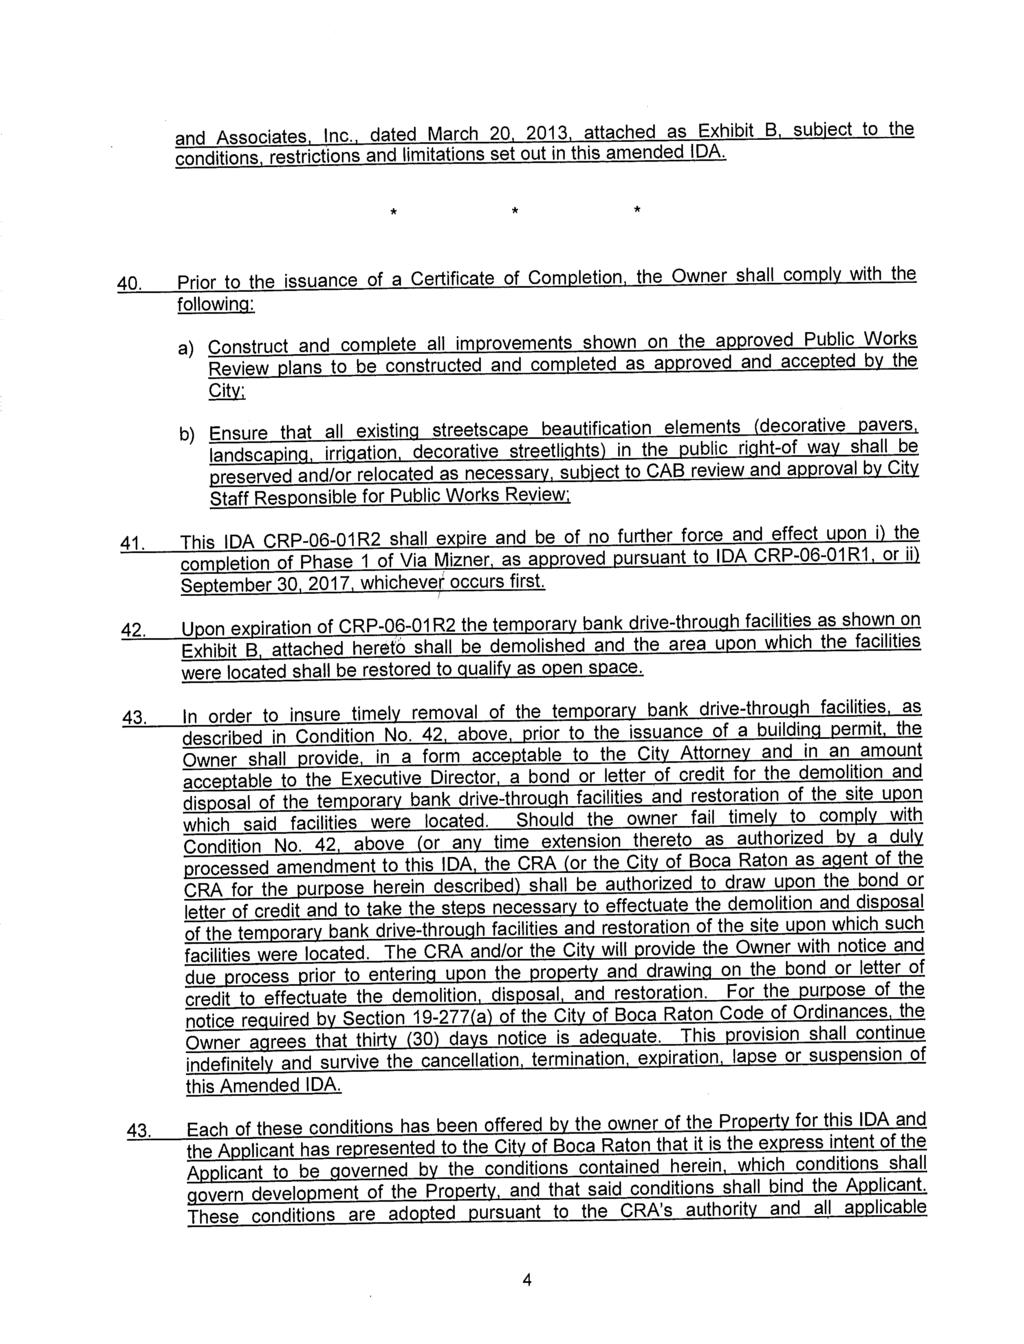 and Associates, Inc., dated March 20, 2013, attached as Exhibit B. subject to the conditions, restrictions and limitations set out in this amended IDA. * * * 40.